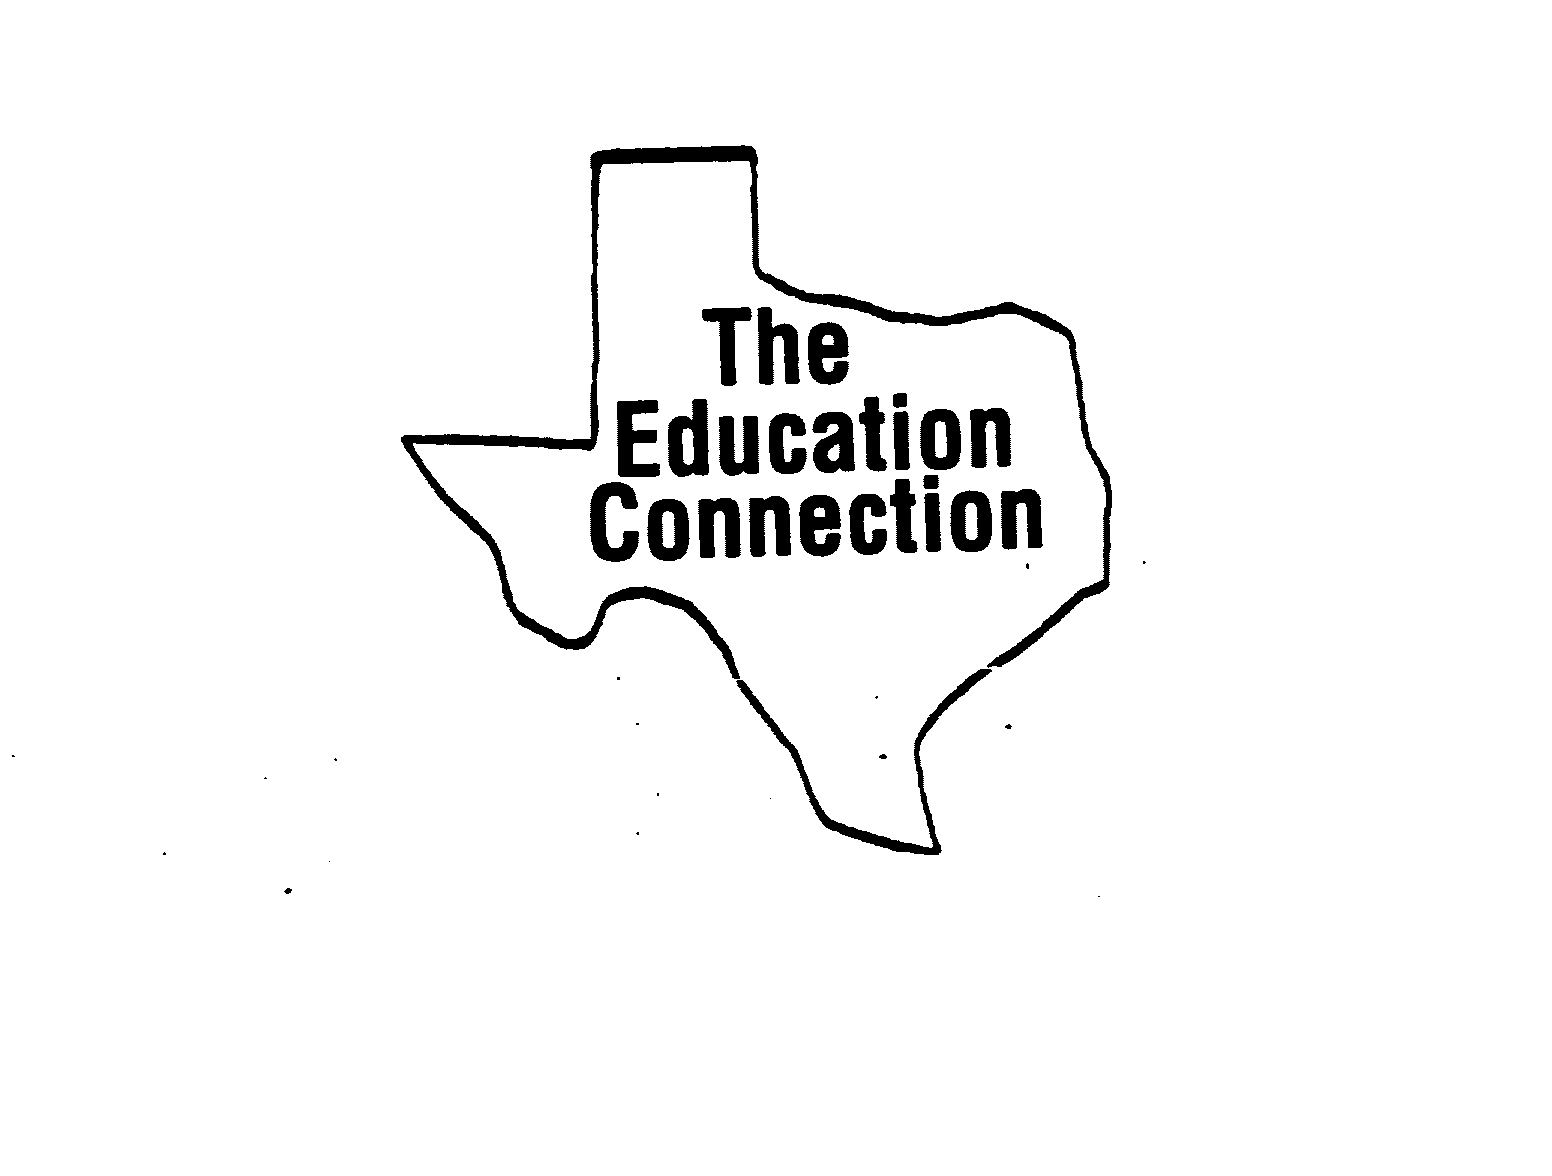  THE EDUCATION CONNECTION